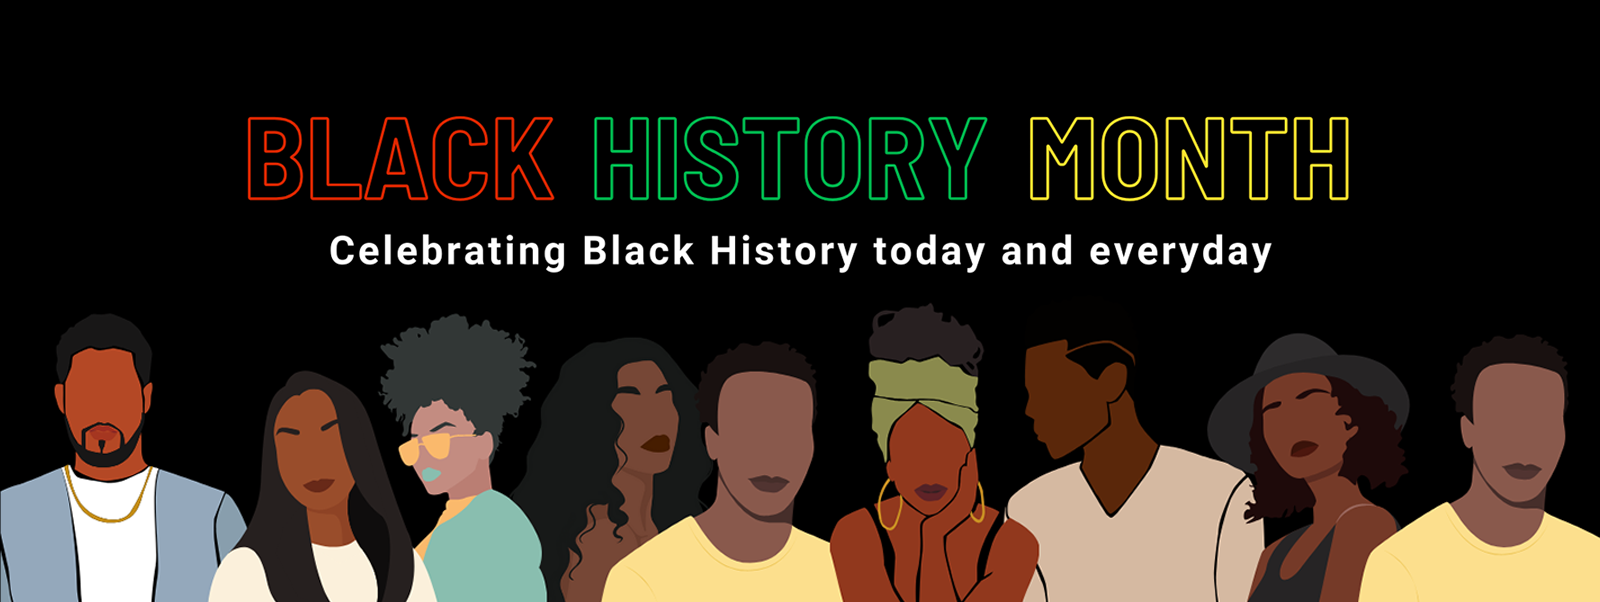 Banner with Black History Month title and graphics of a group of African American people along the bottom